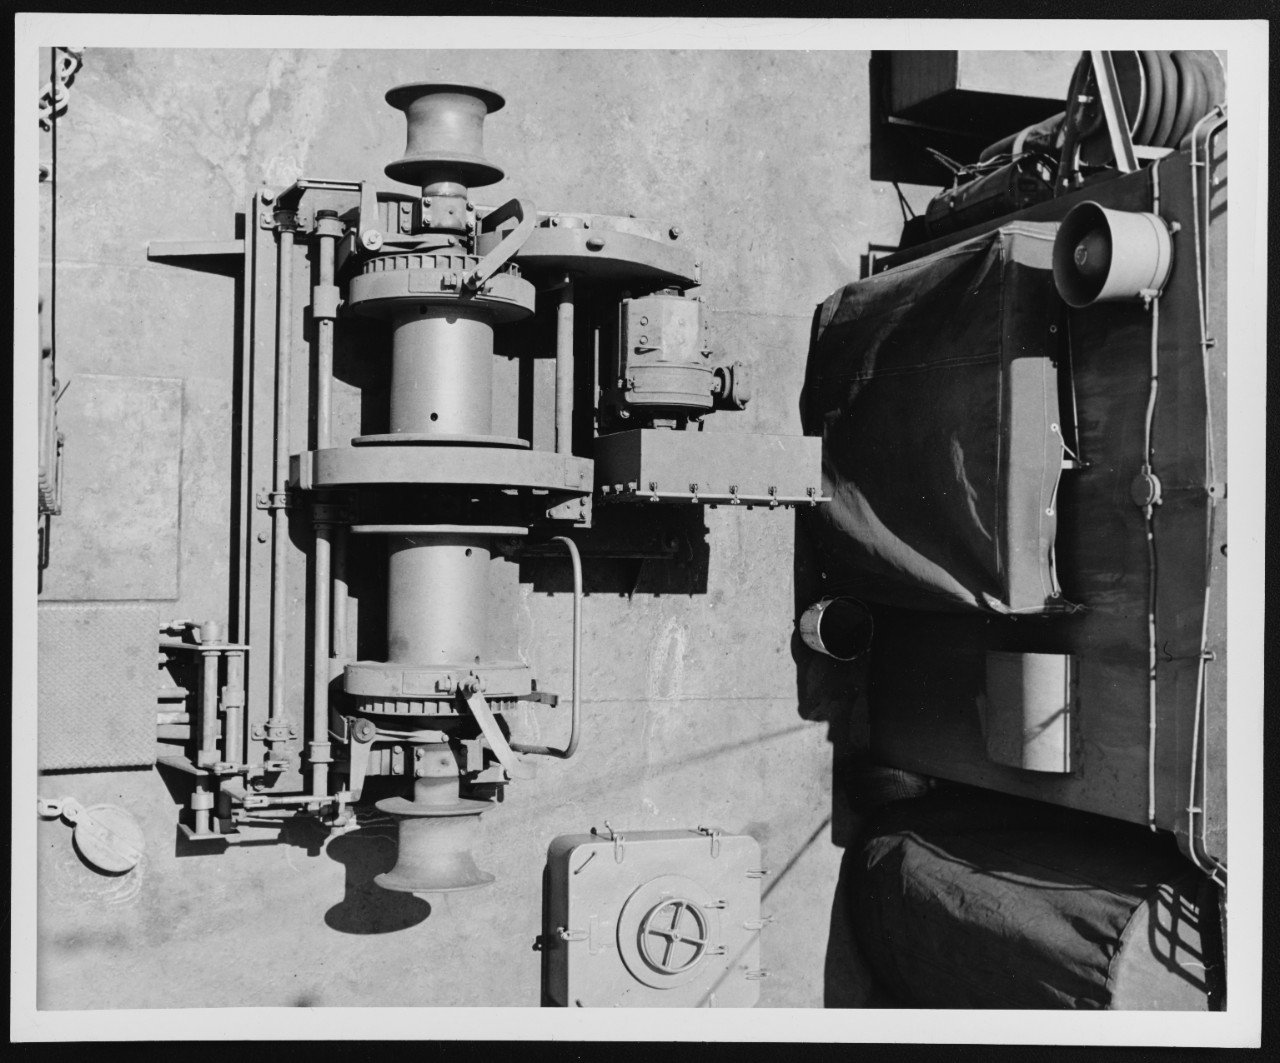 Deck winch aboard a CHIMO (ACM-1) class auxiliary minelayer, 1945